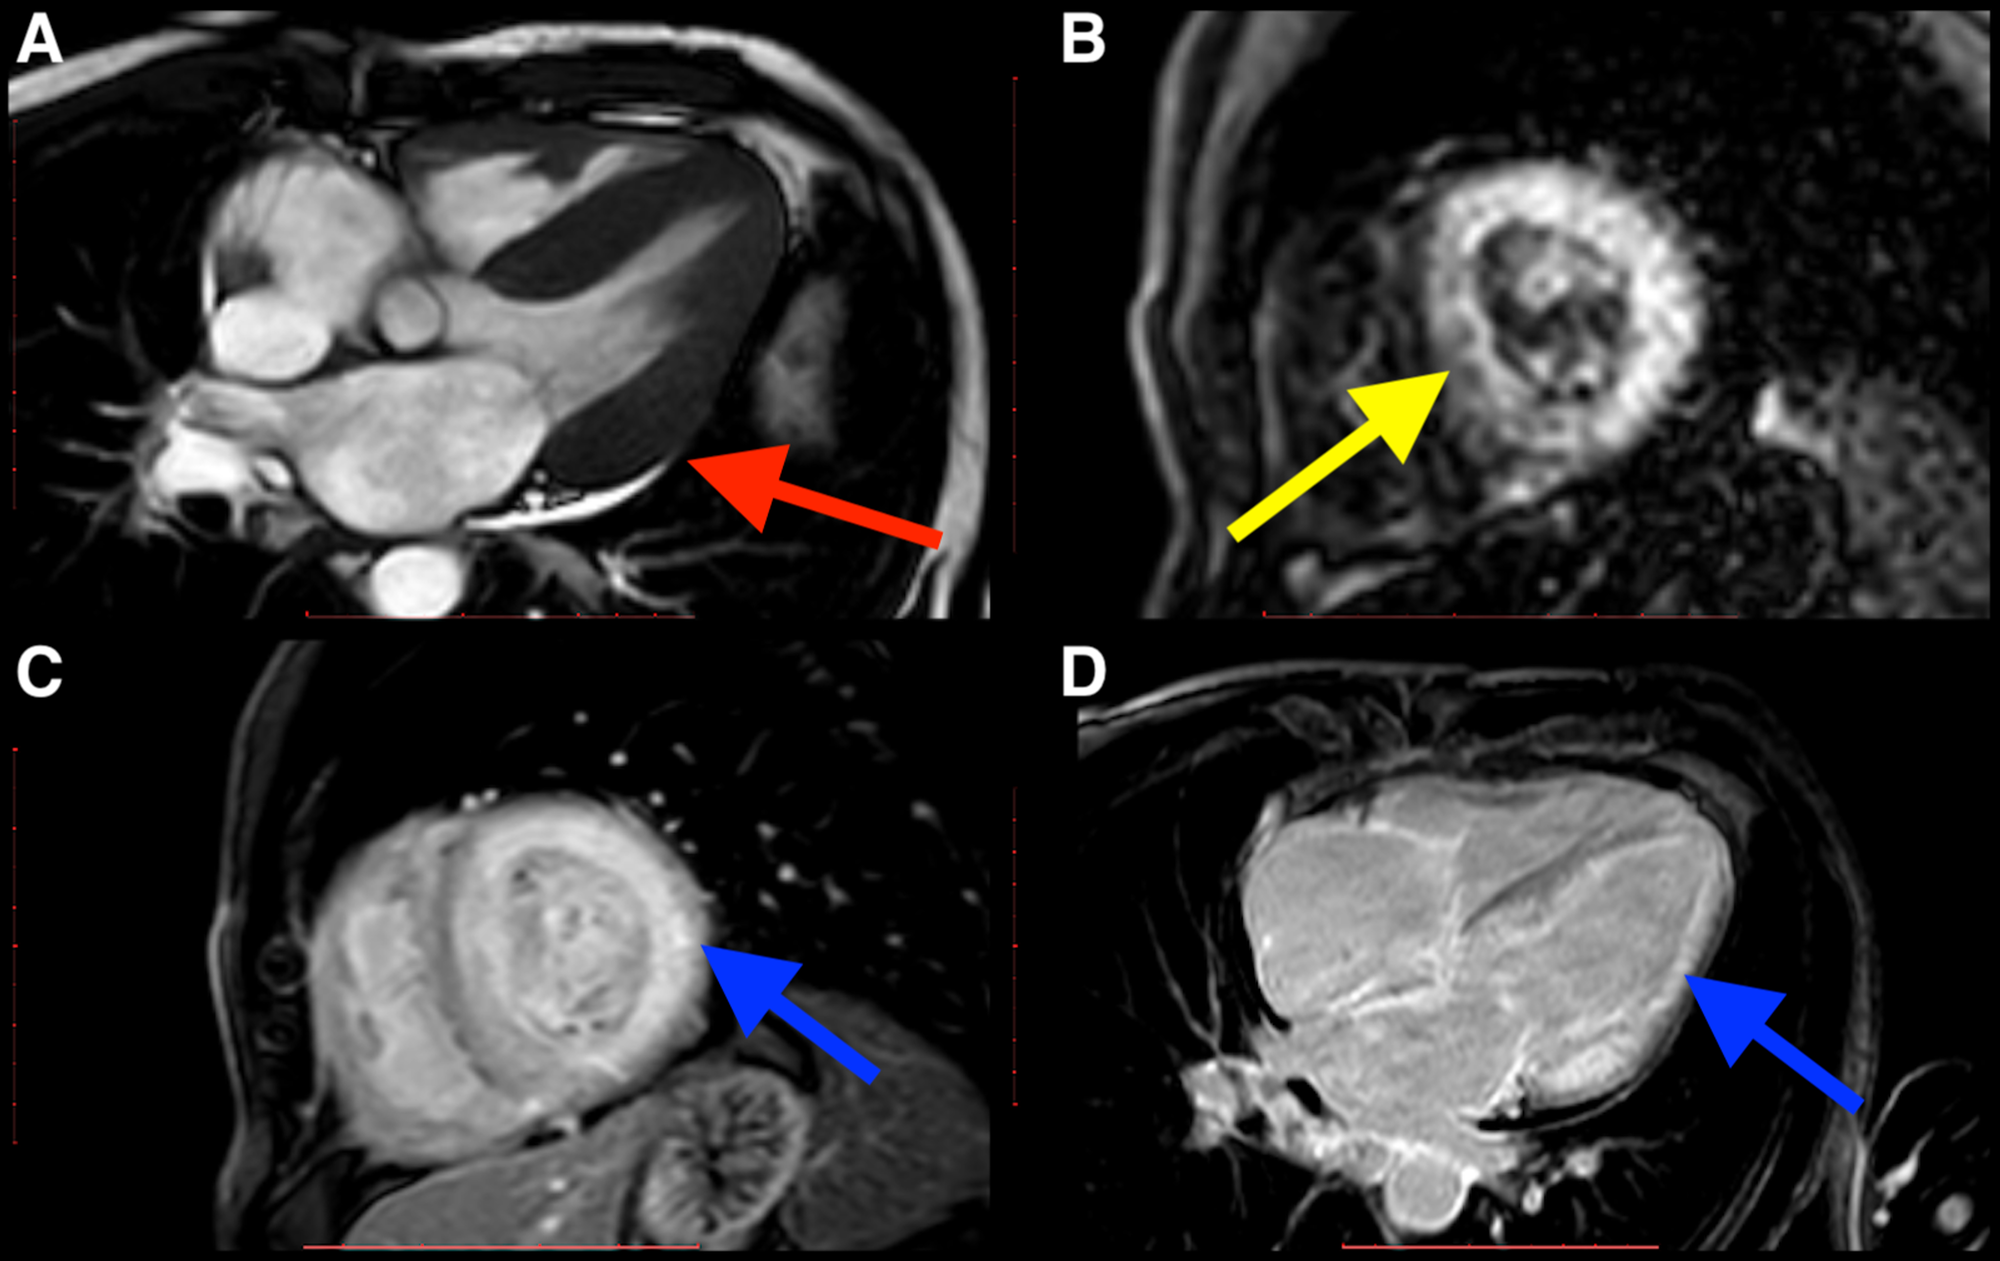 rig Overfladisk forhold Cureus | The Spectrum of Non-ischemic Cardiac Magnetic Resonance Imaging  Findings: A Retrospective Analysis | Article